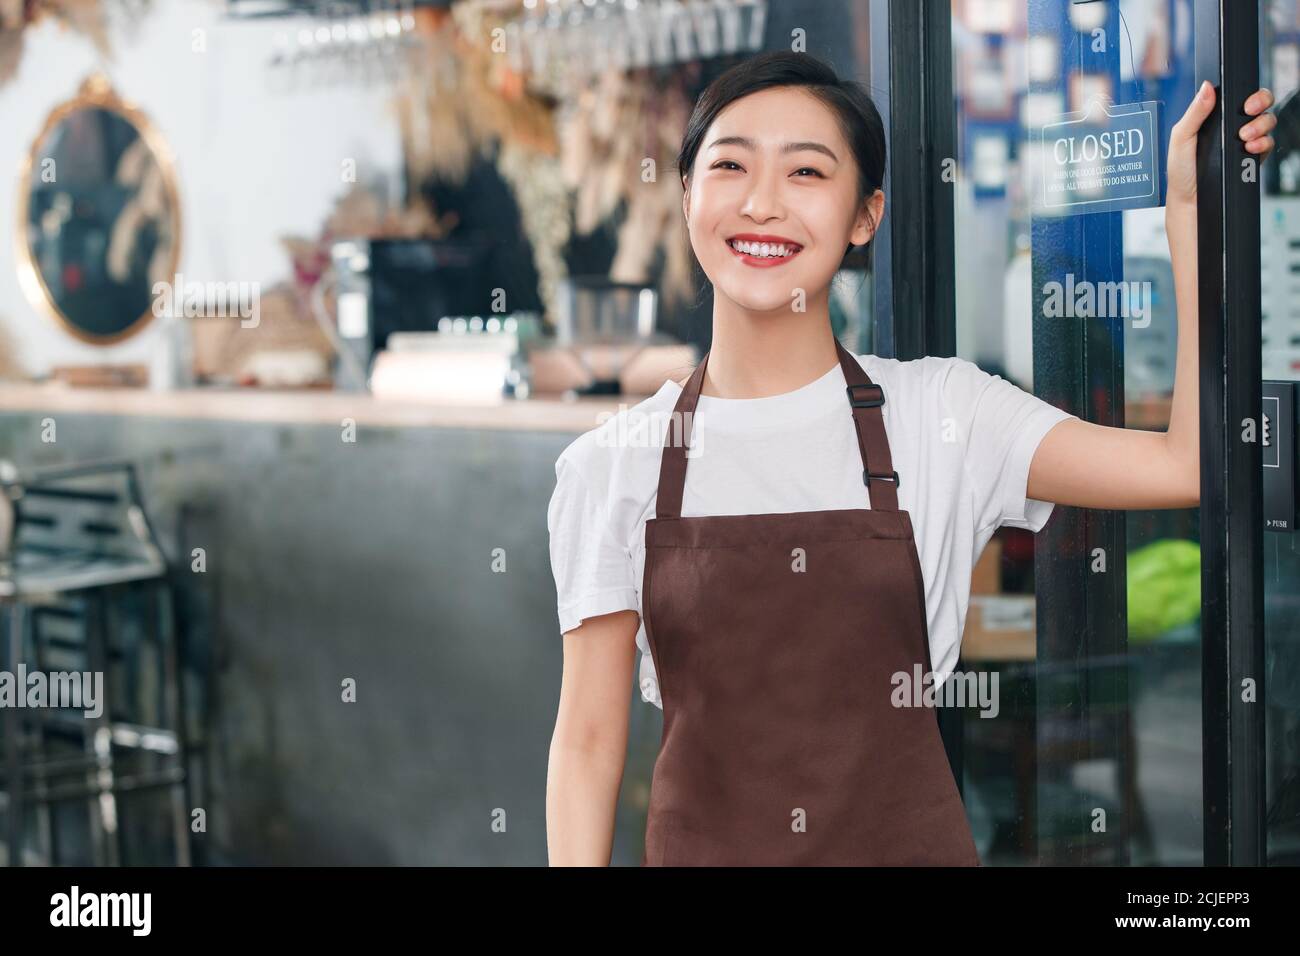 Standing at the door of the cafe waitress Stock Photo